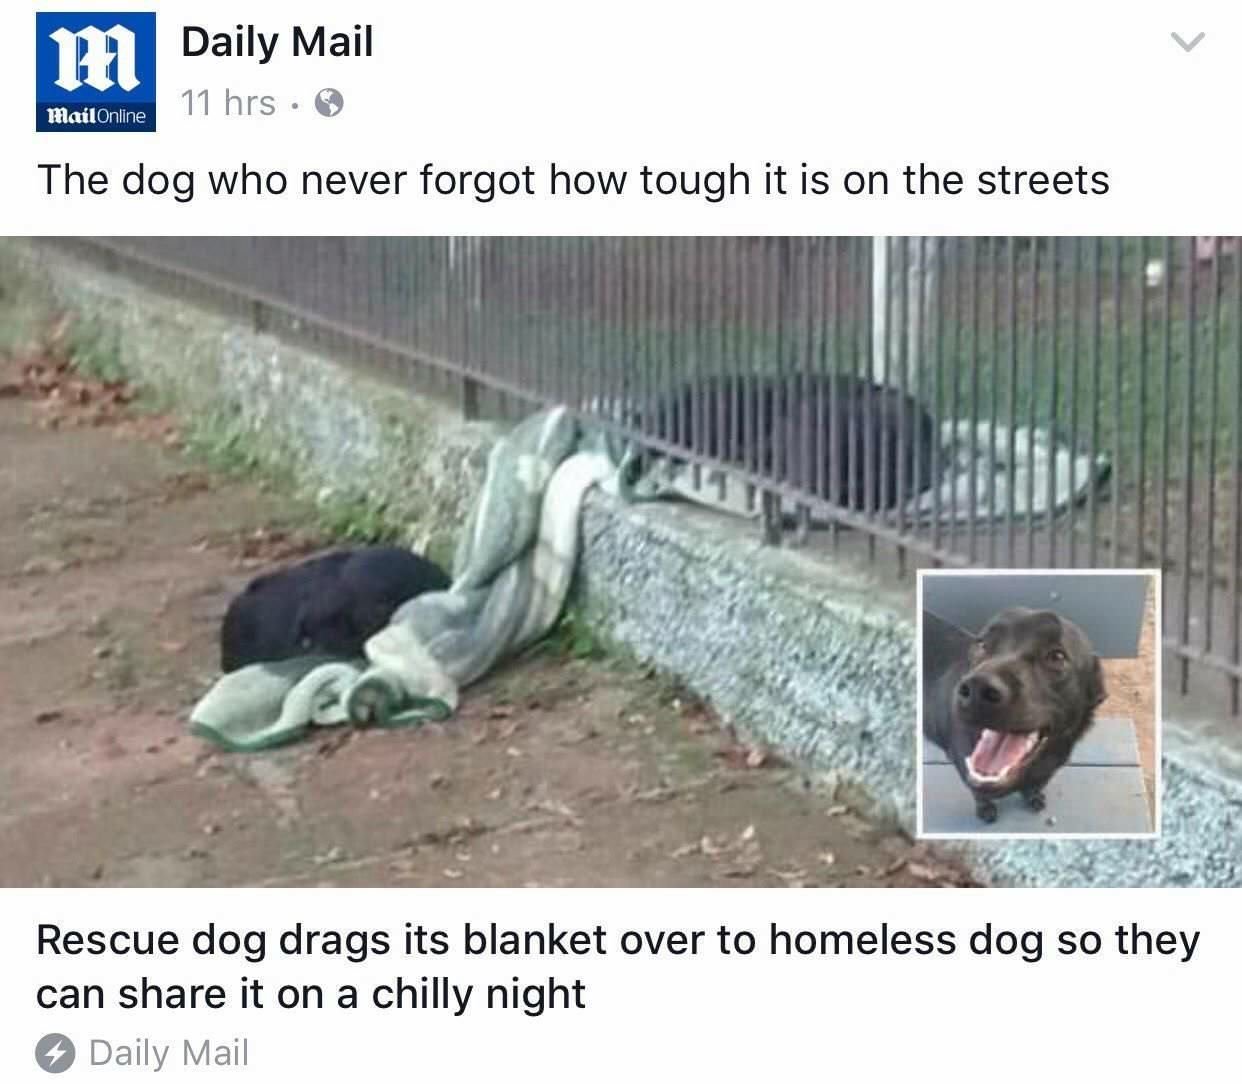 wholesome meme rescue dog shares blanket - M Daily Mail mandatorama 11 hrs 11 hrs. Mail Online The dog who never forgot how tough it is on the streets Rescue dog drags its blanket over to homeless dog so they can it on a chilly night Daily Mail